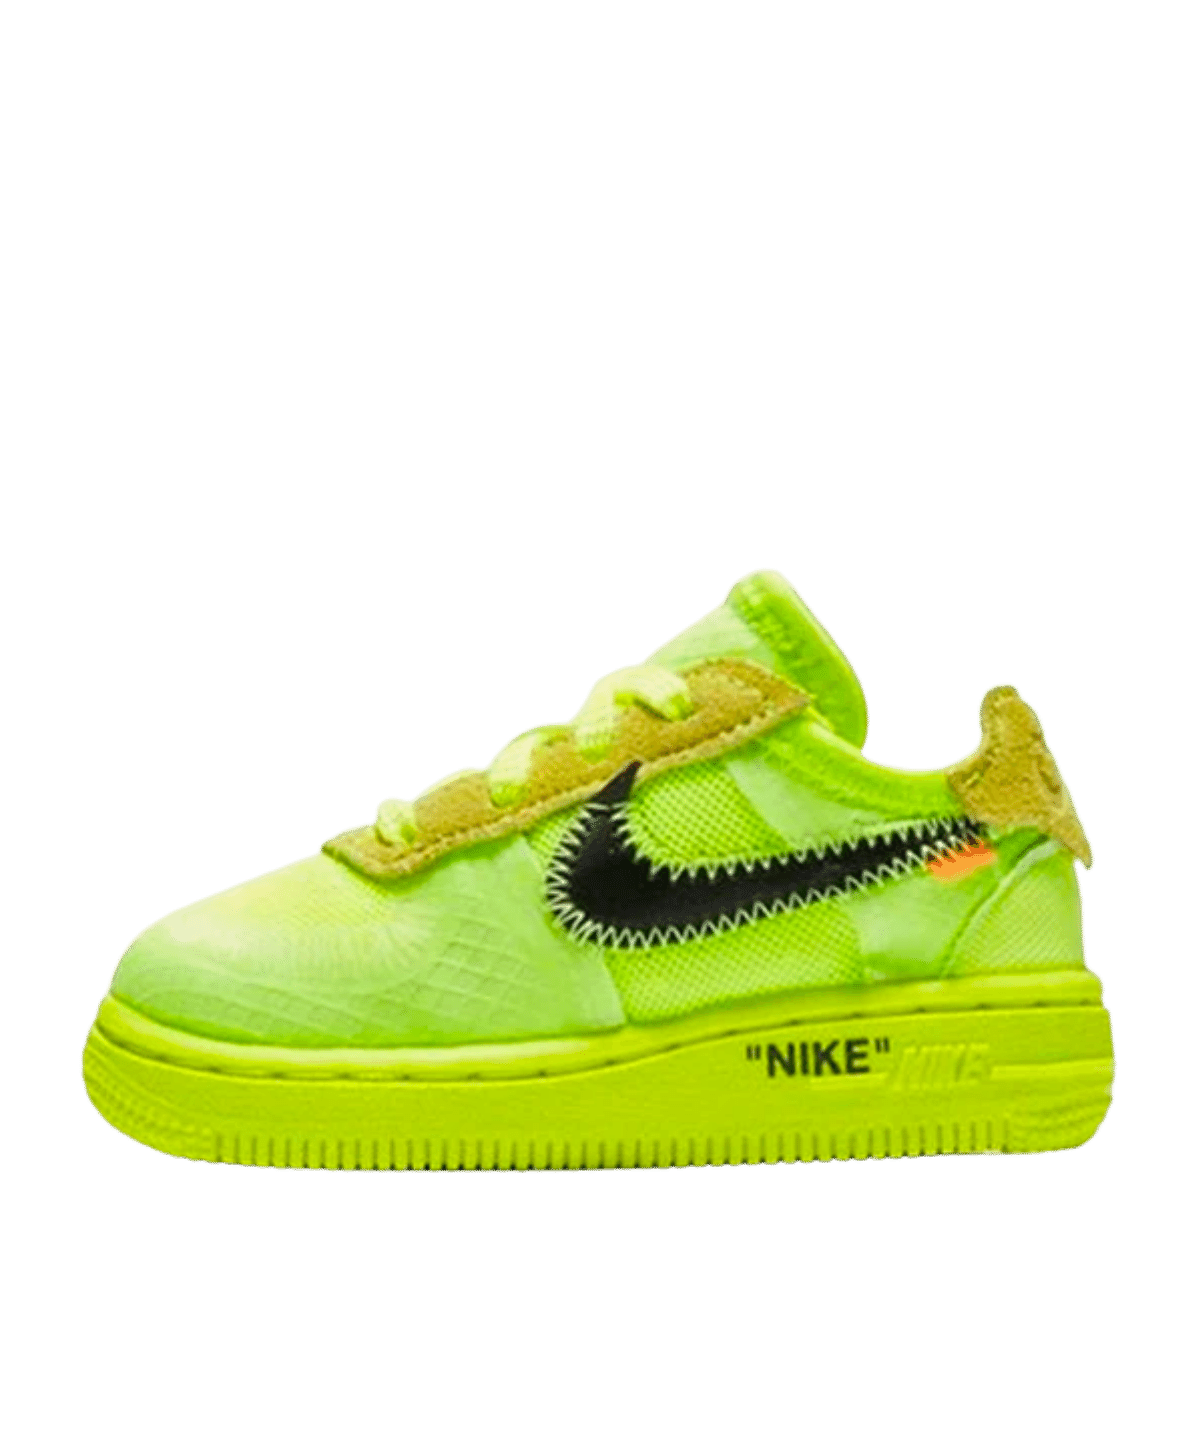 Nike Air Force 1 Kids | Kids Nike Air Forces | Air Forces For Kids ...